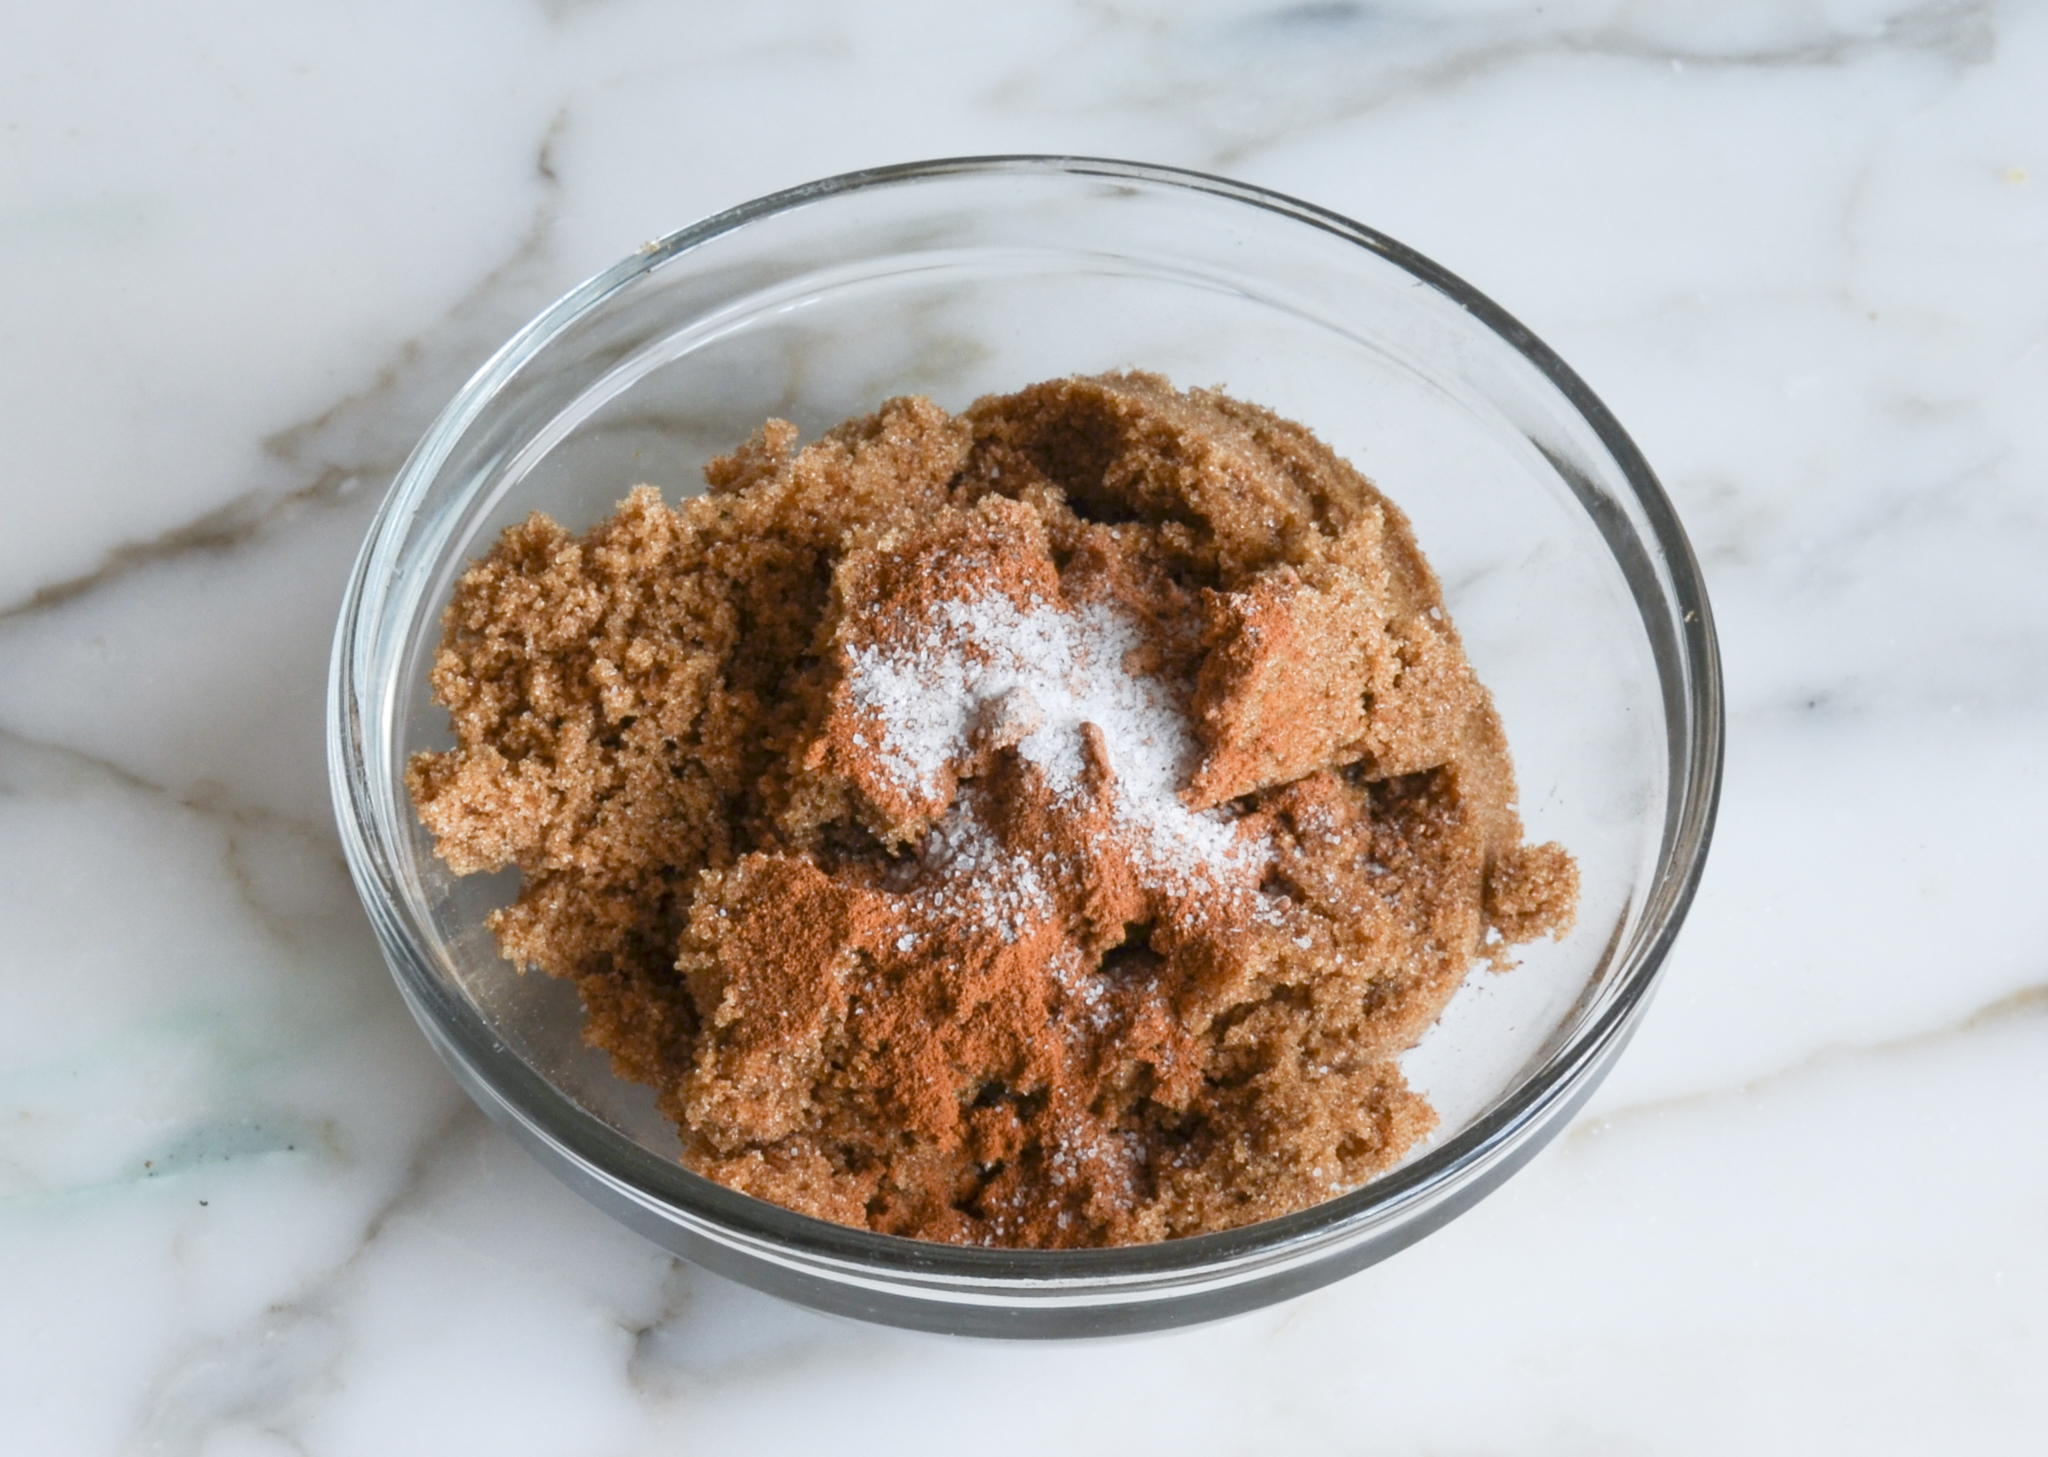 brown sugar, salt, and spices in bowl